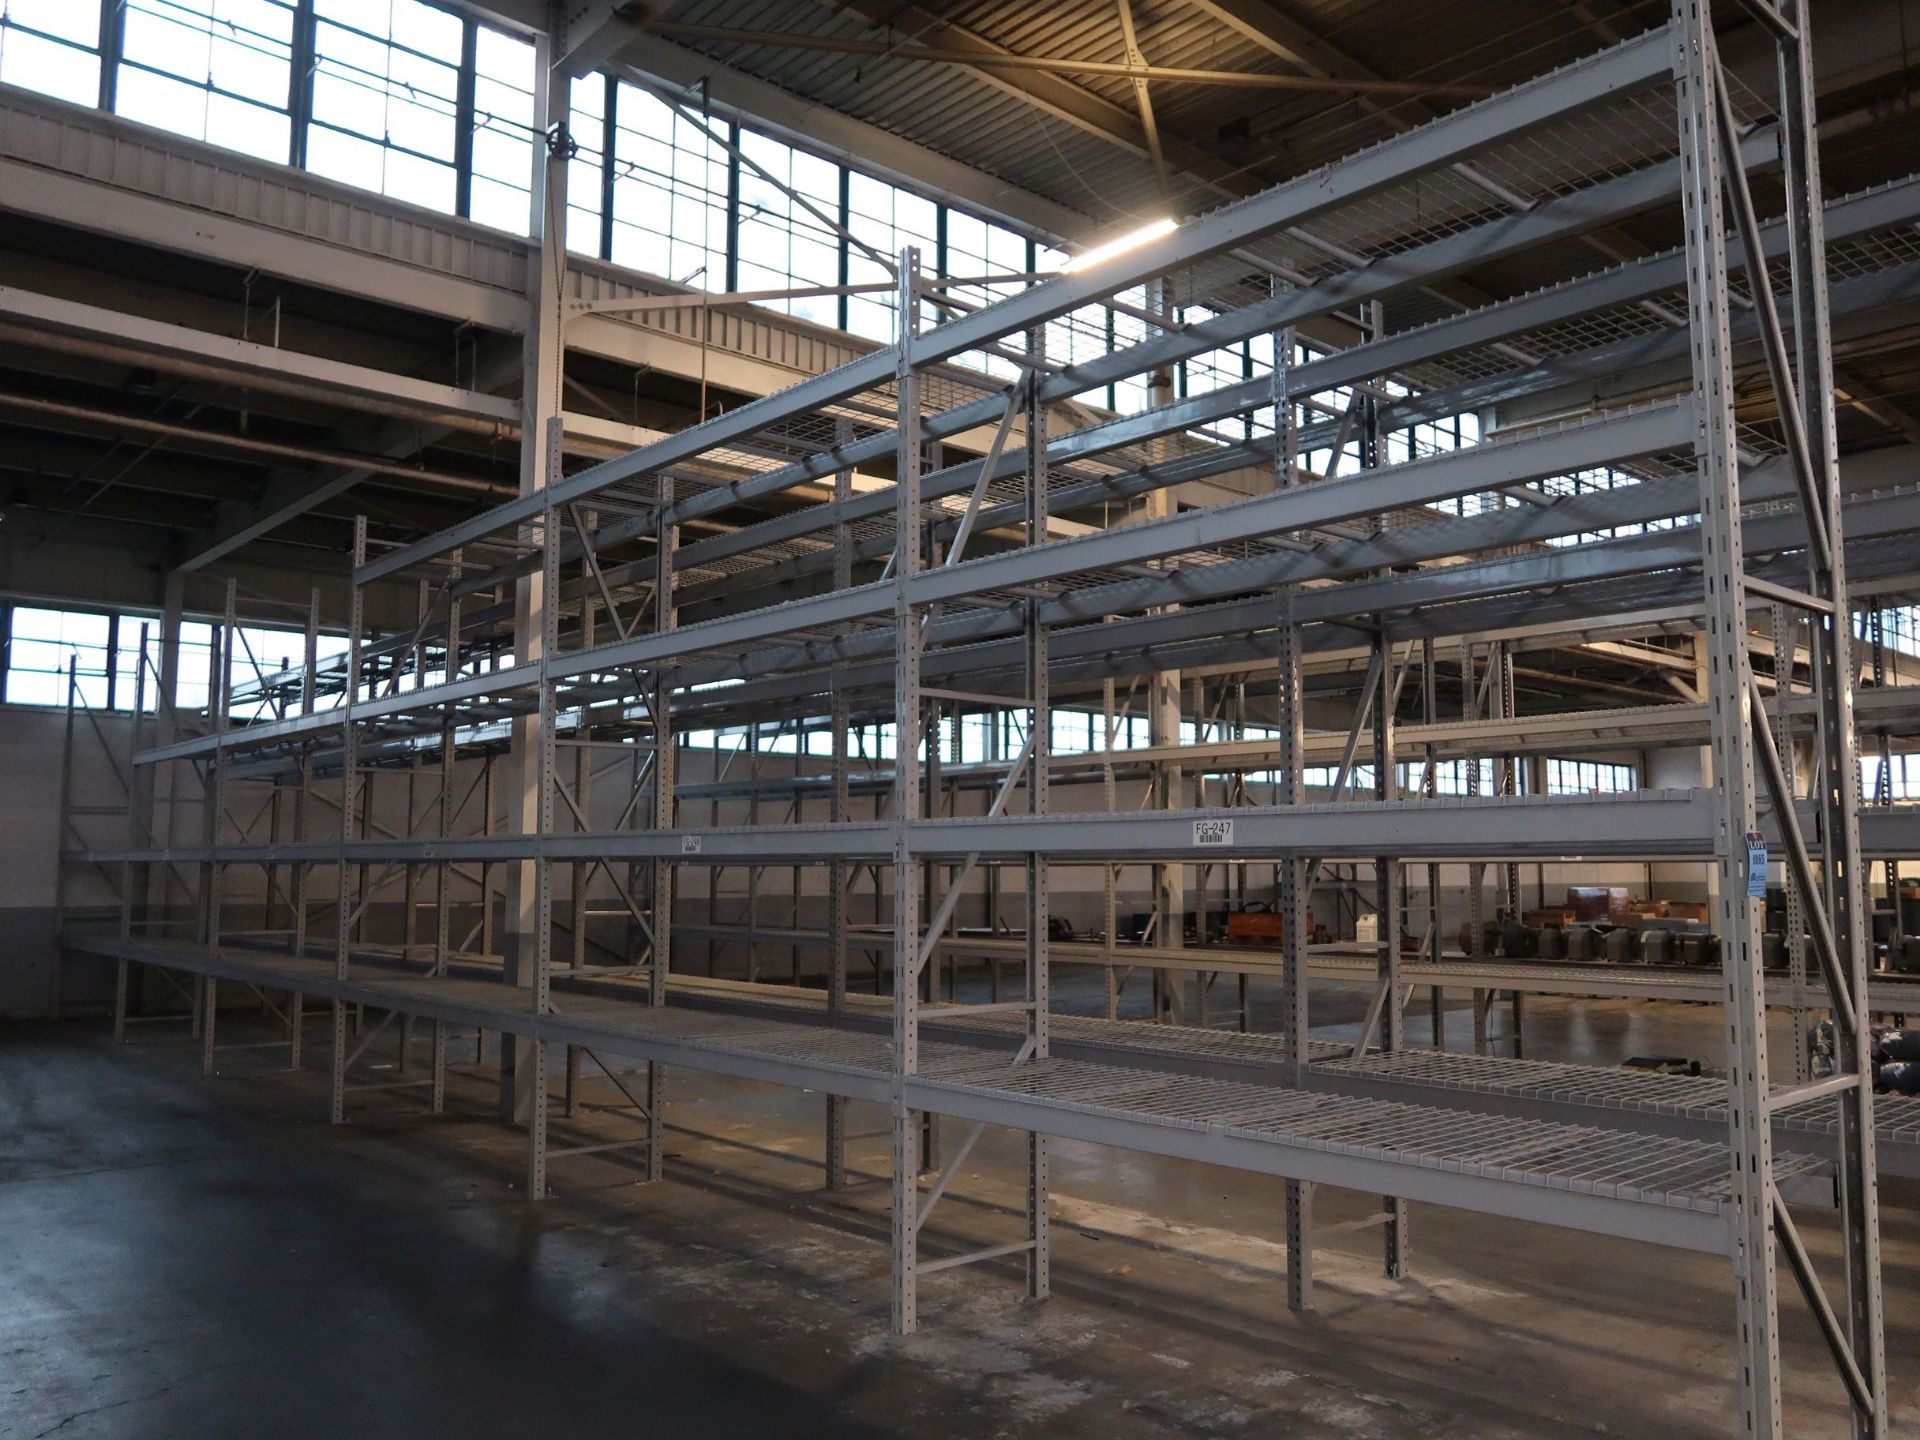 SECTIONS 32" X 124" X 180" NOTCH TYPE ADJUSTABLE BEAM PALLET RACKS WITH (7) 32" X 180" UPRIGHTS, (